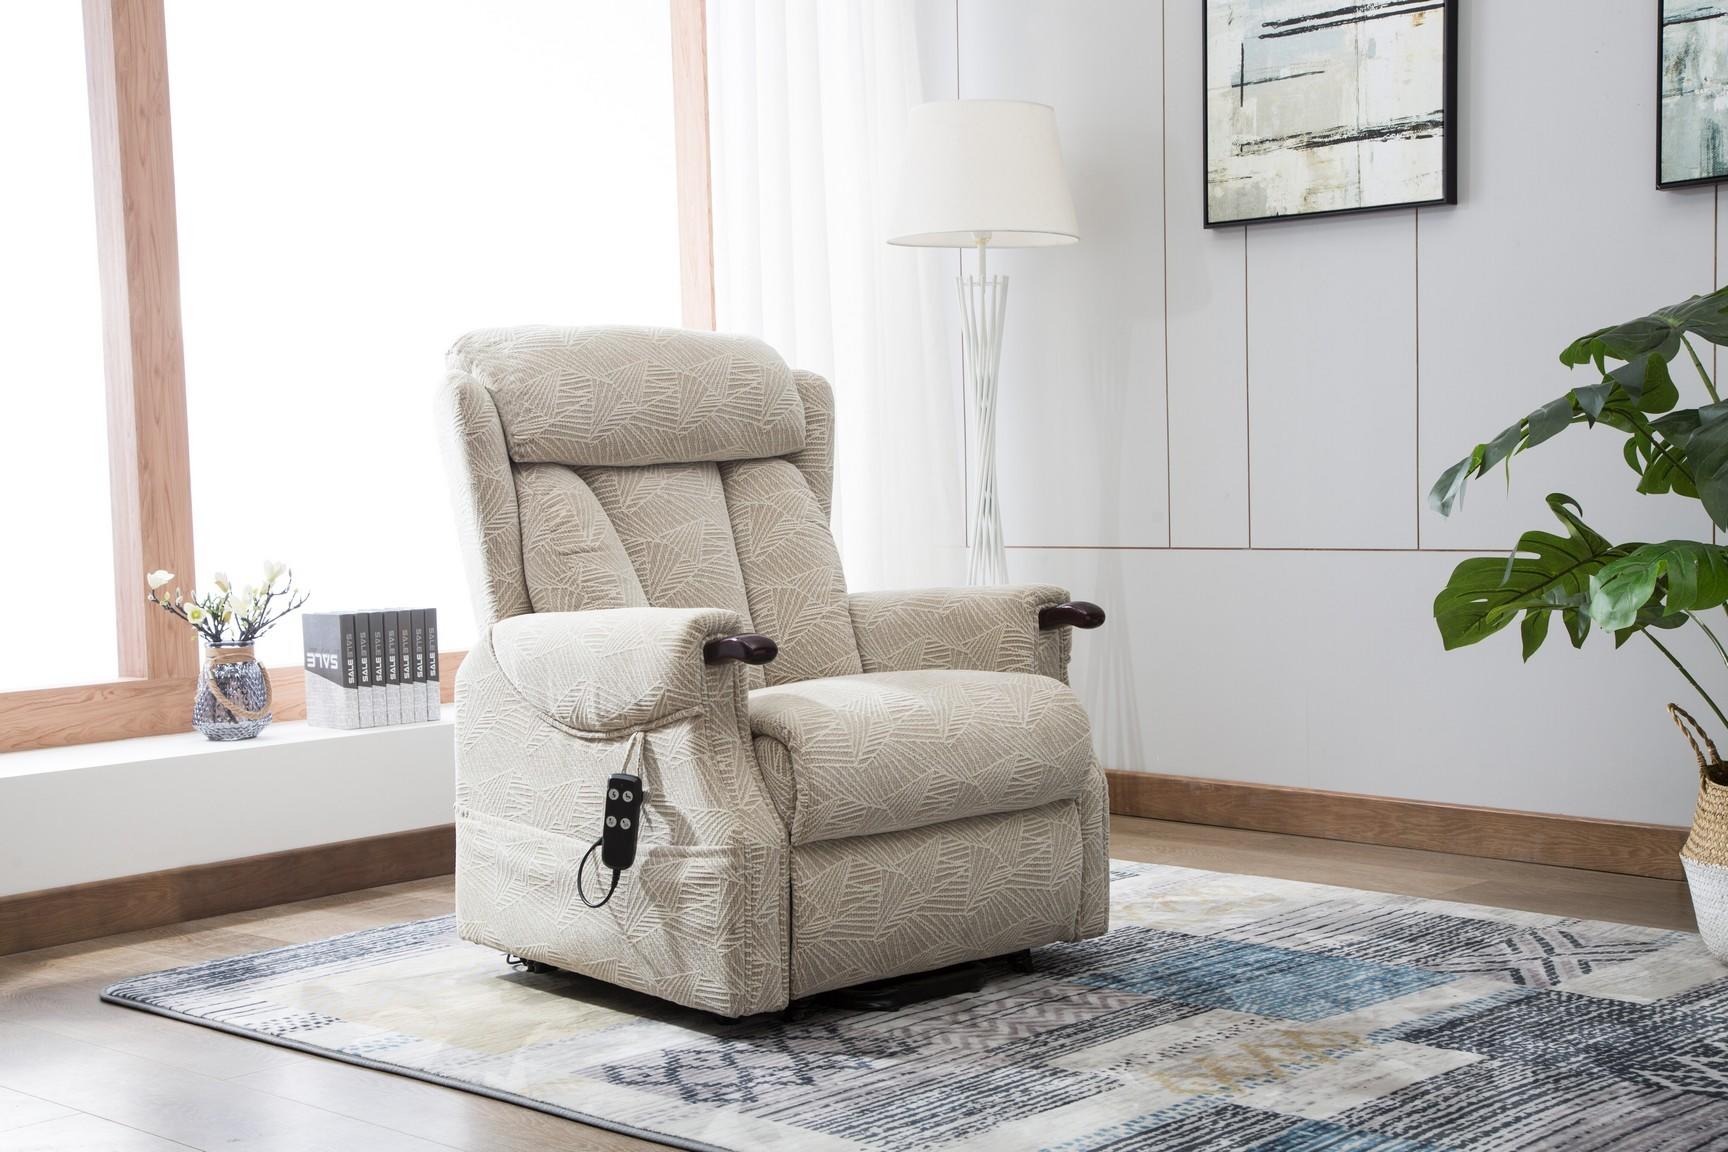 Help up with the Denmark Rise and Recline Chair